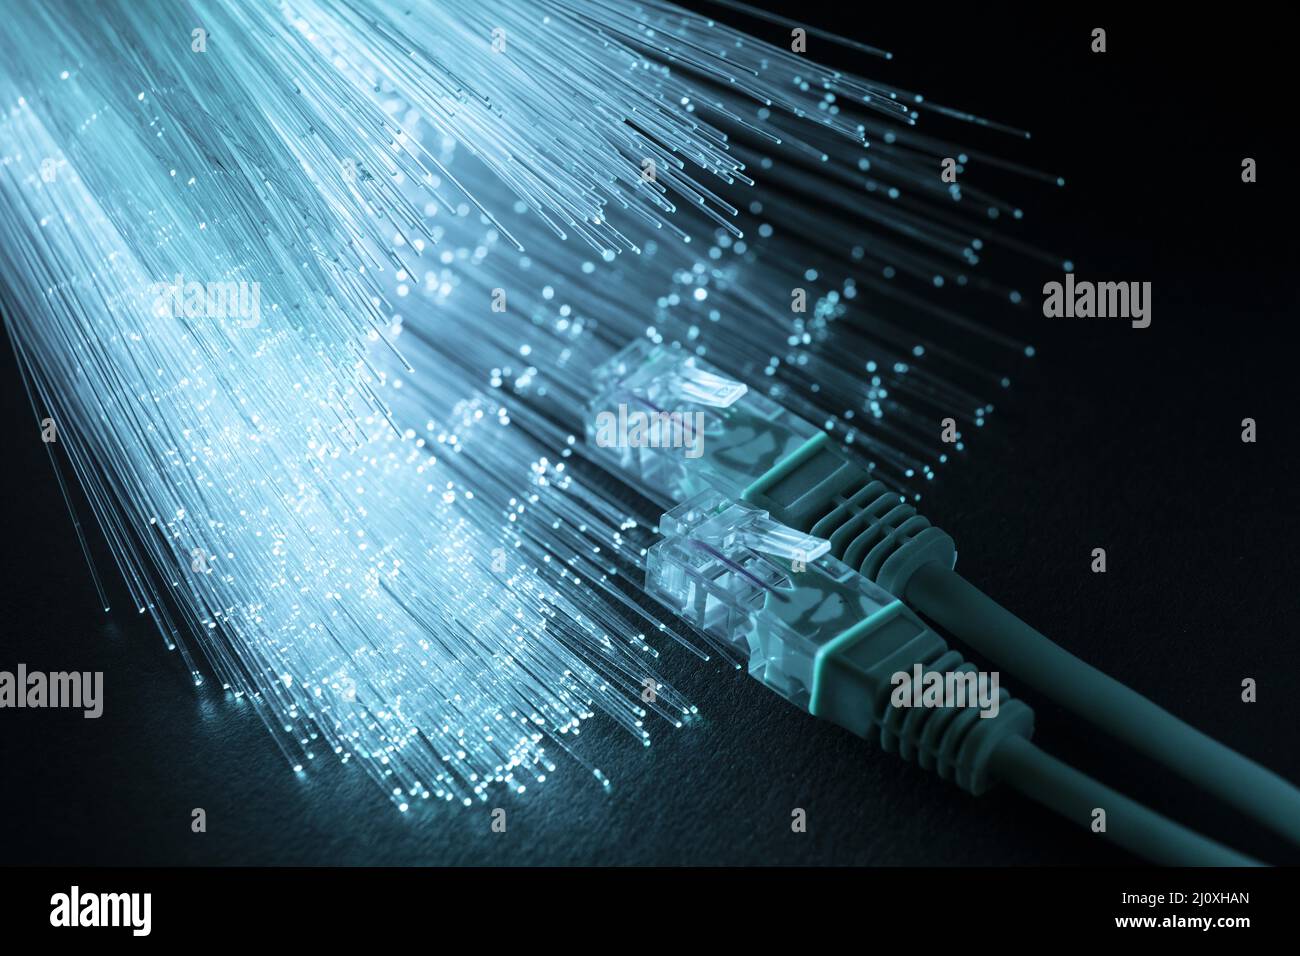 Blue optic fiber with ethernet cables. High quality beautiful photo concept Stock Photo